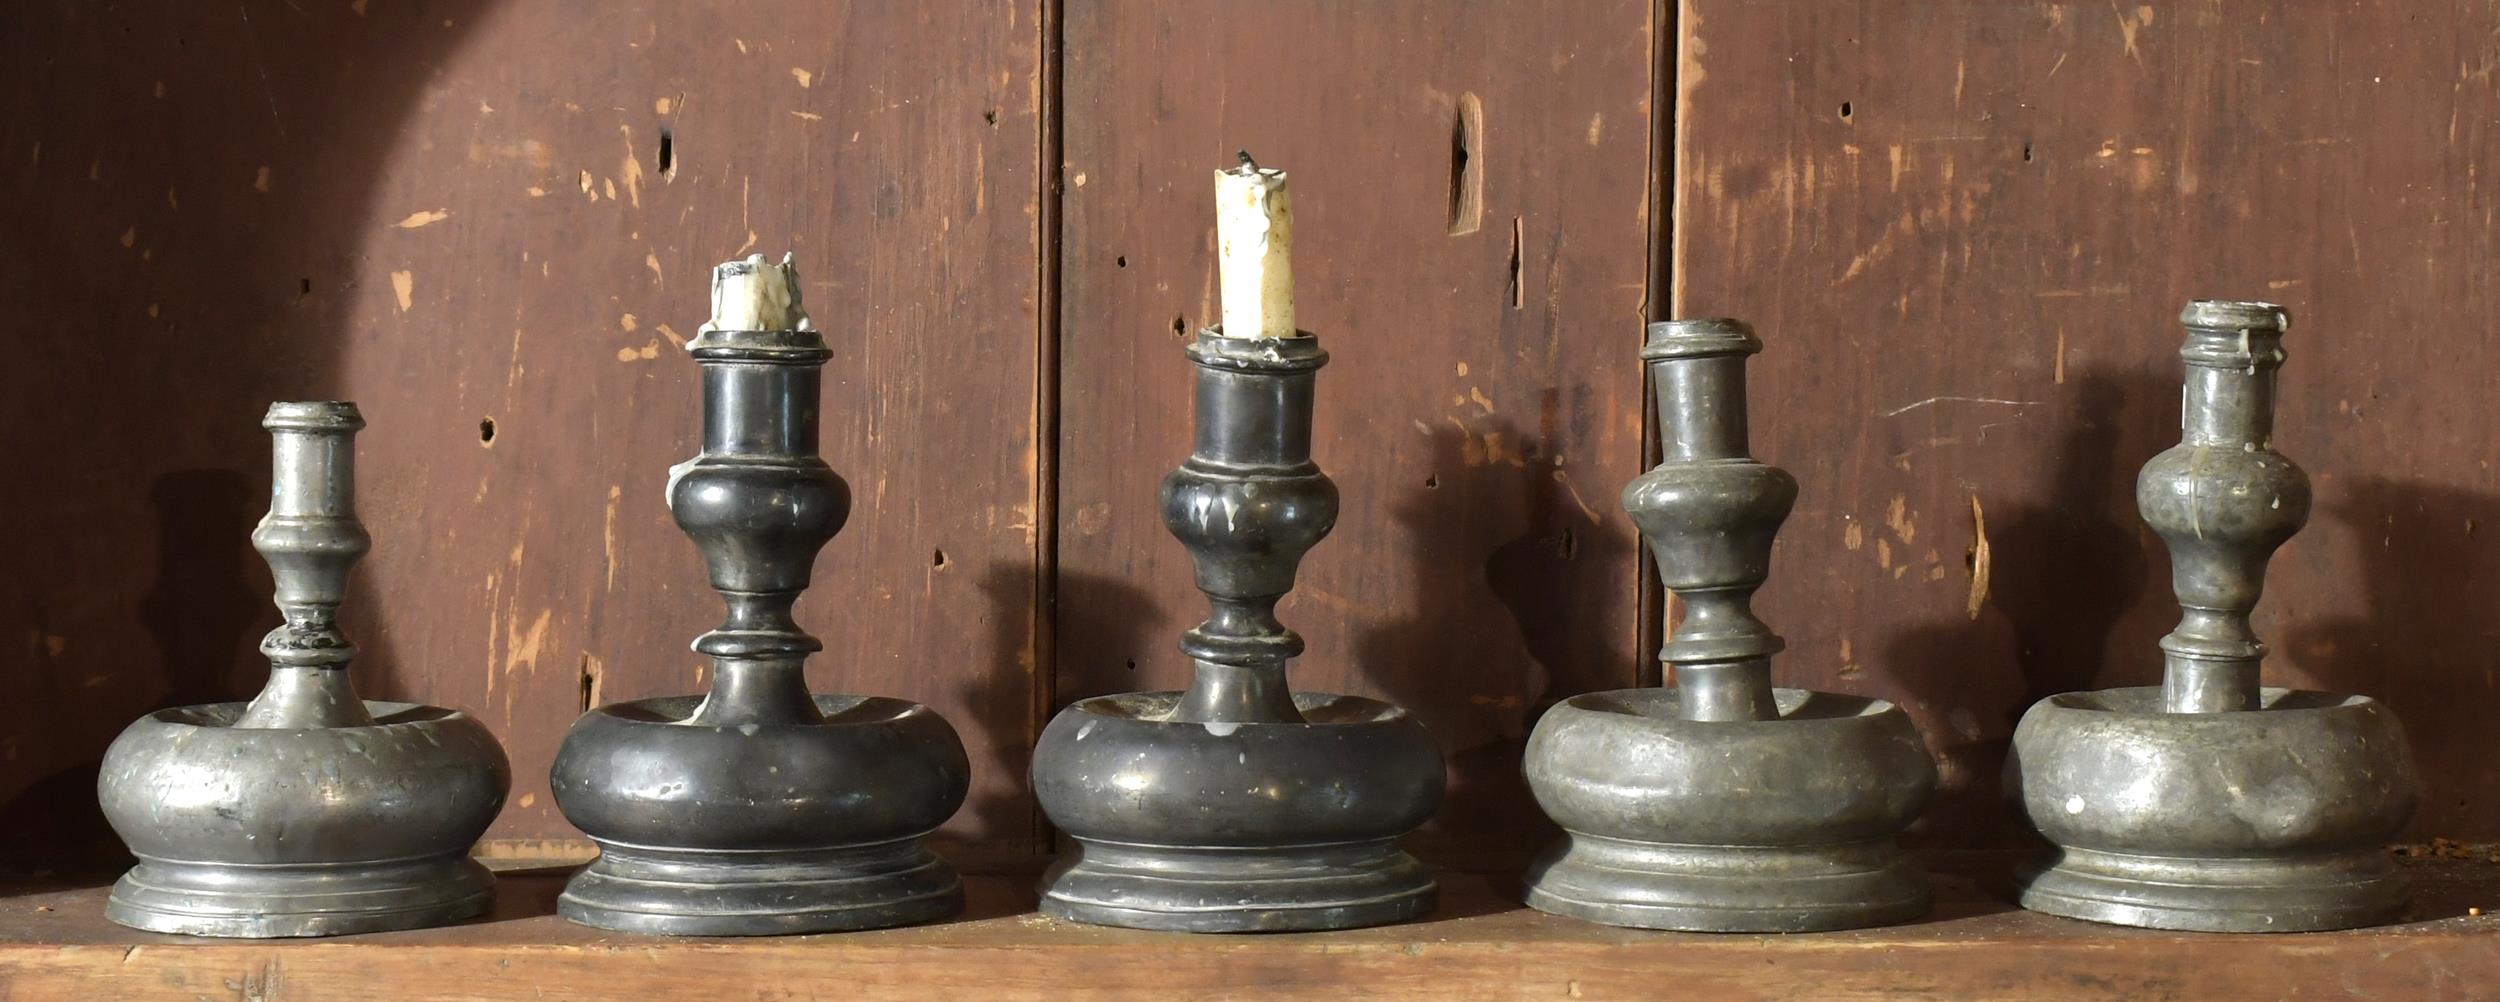 FIVE 17TH C PEWTER CANDLESTICKS  29e1f3